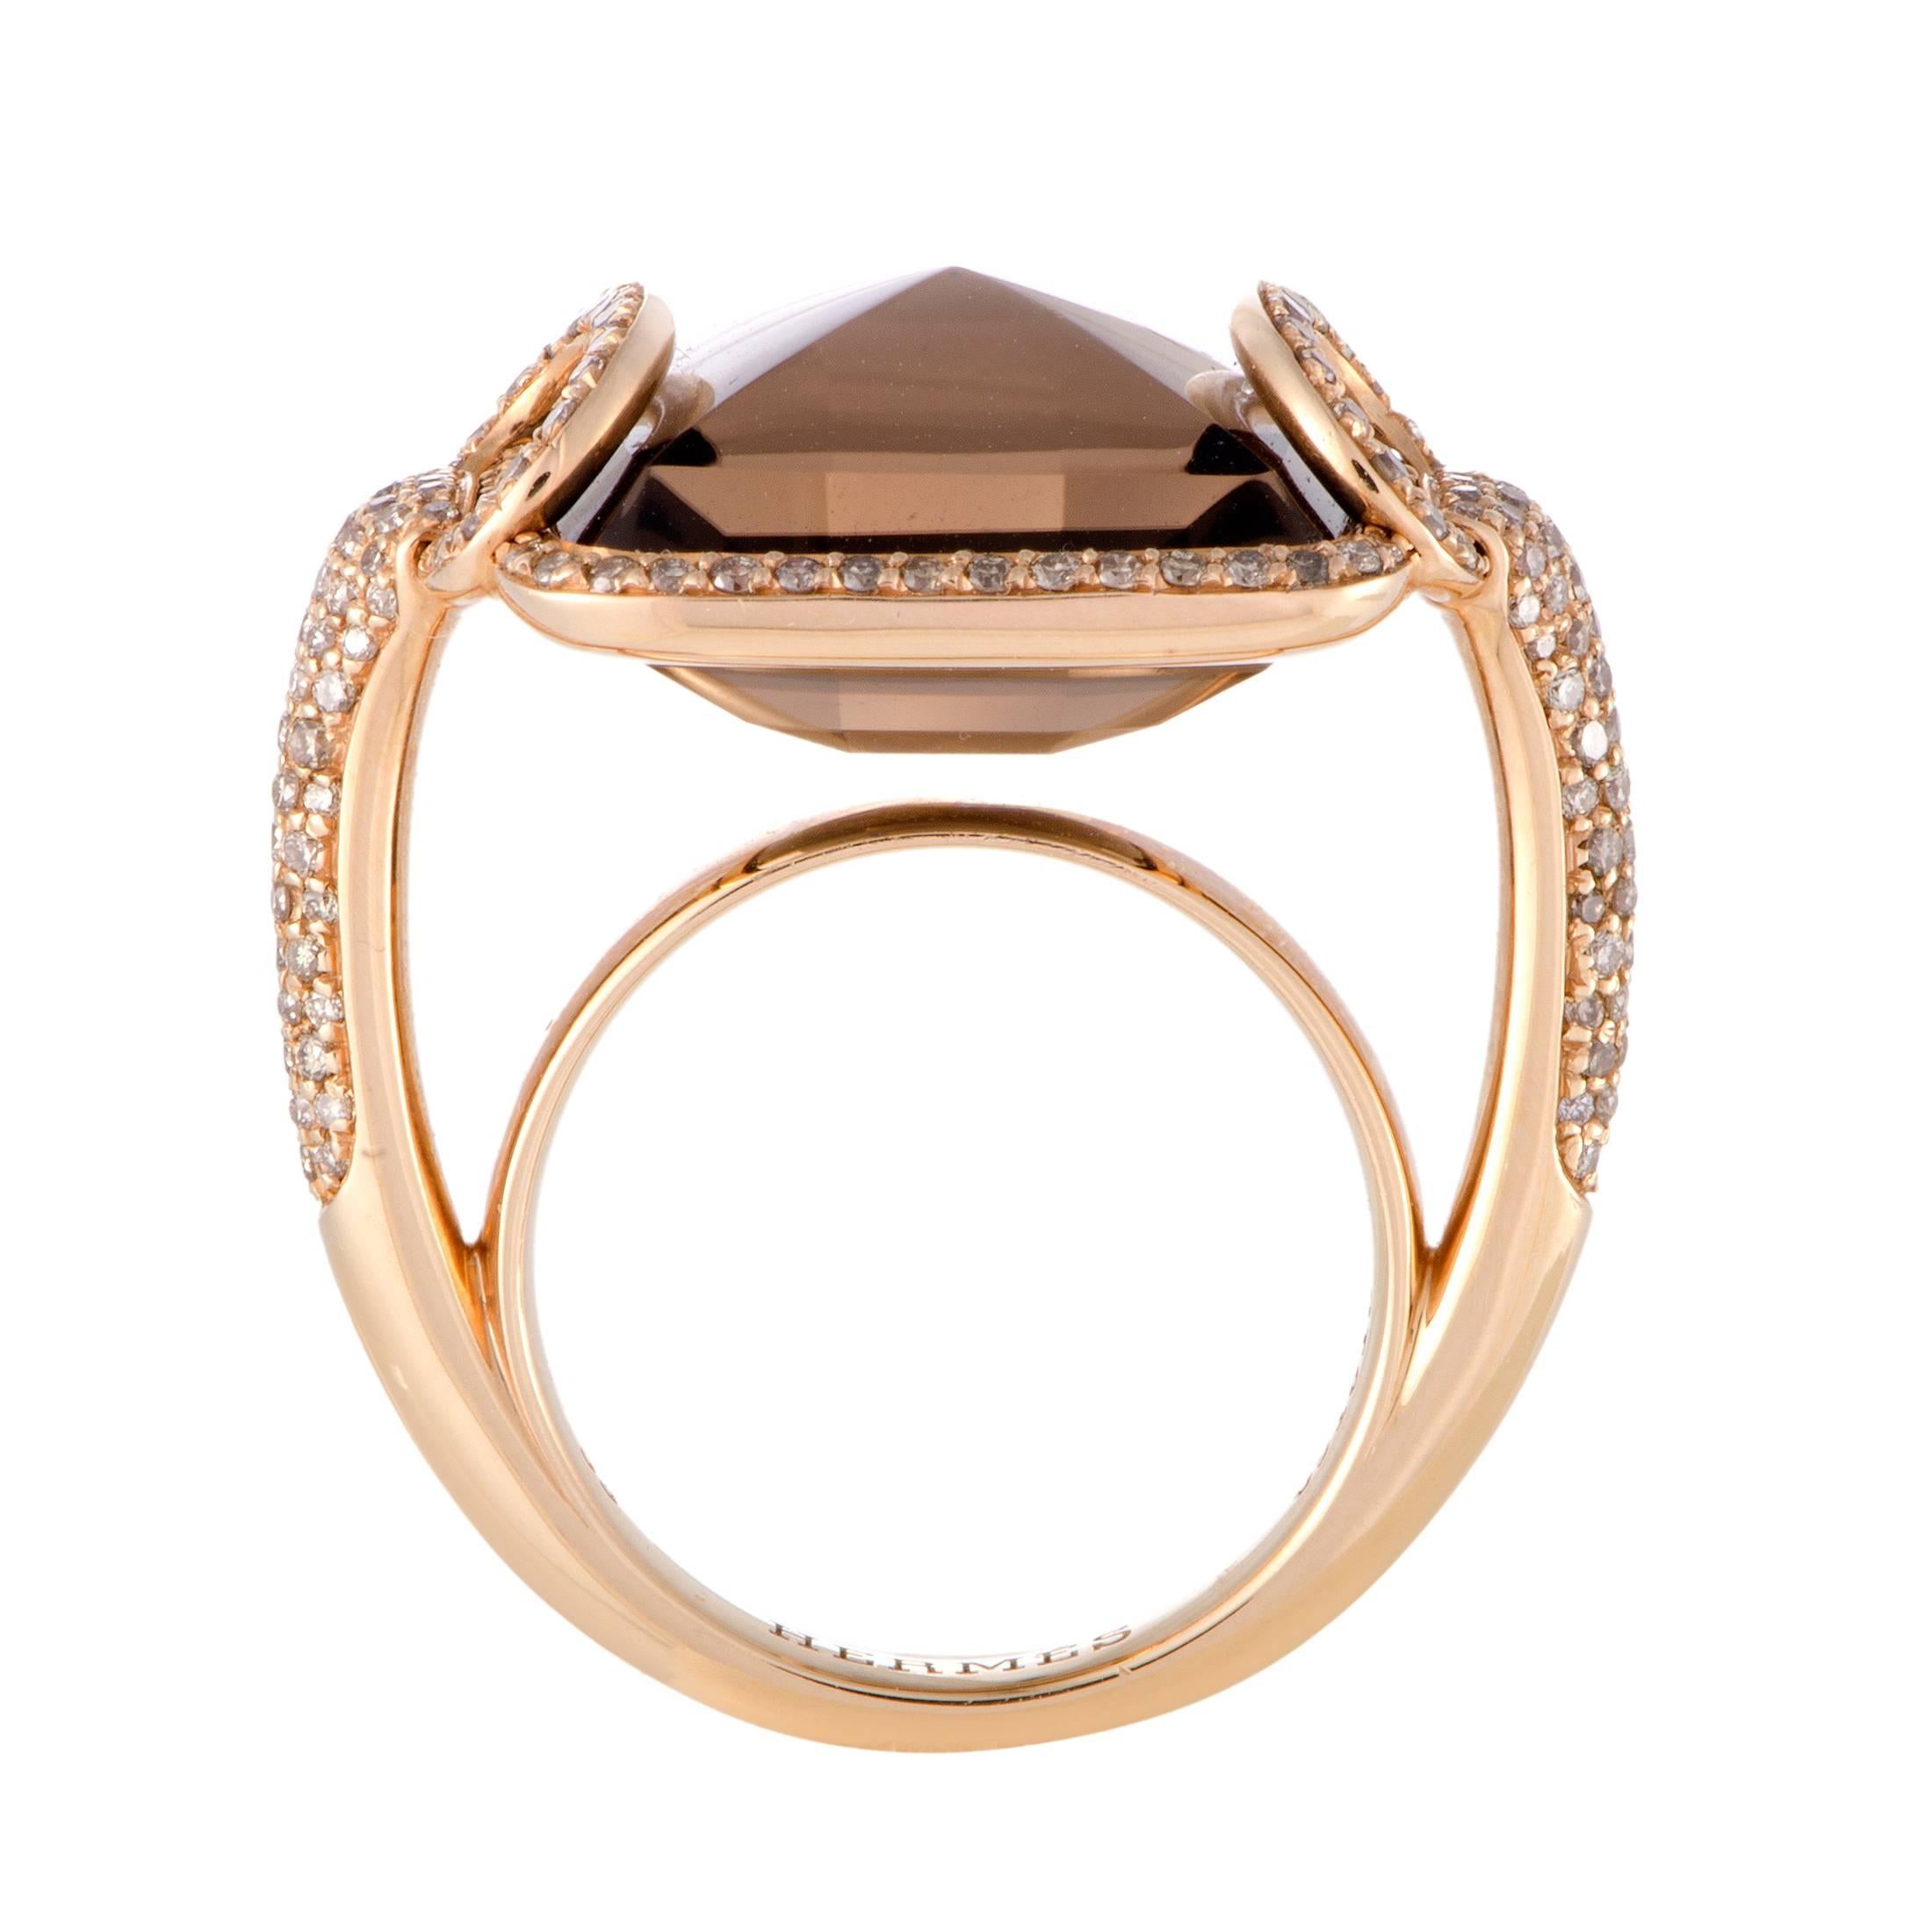 Bring a substantial dose of bling to your ensembles with this Hermes ring that's poised to garner attention at a cocktail party. Fashioned from 18K rose gold, this ring features a pyramid-shaped smoky quartz stone, surrounded by brilliant cut